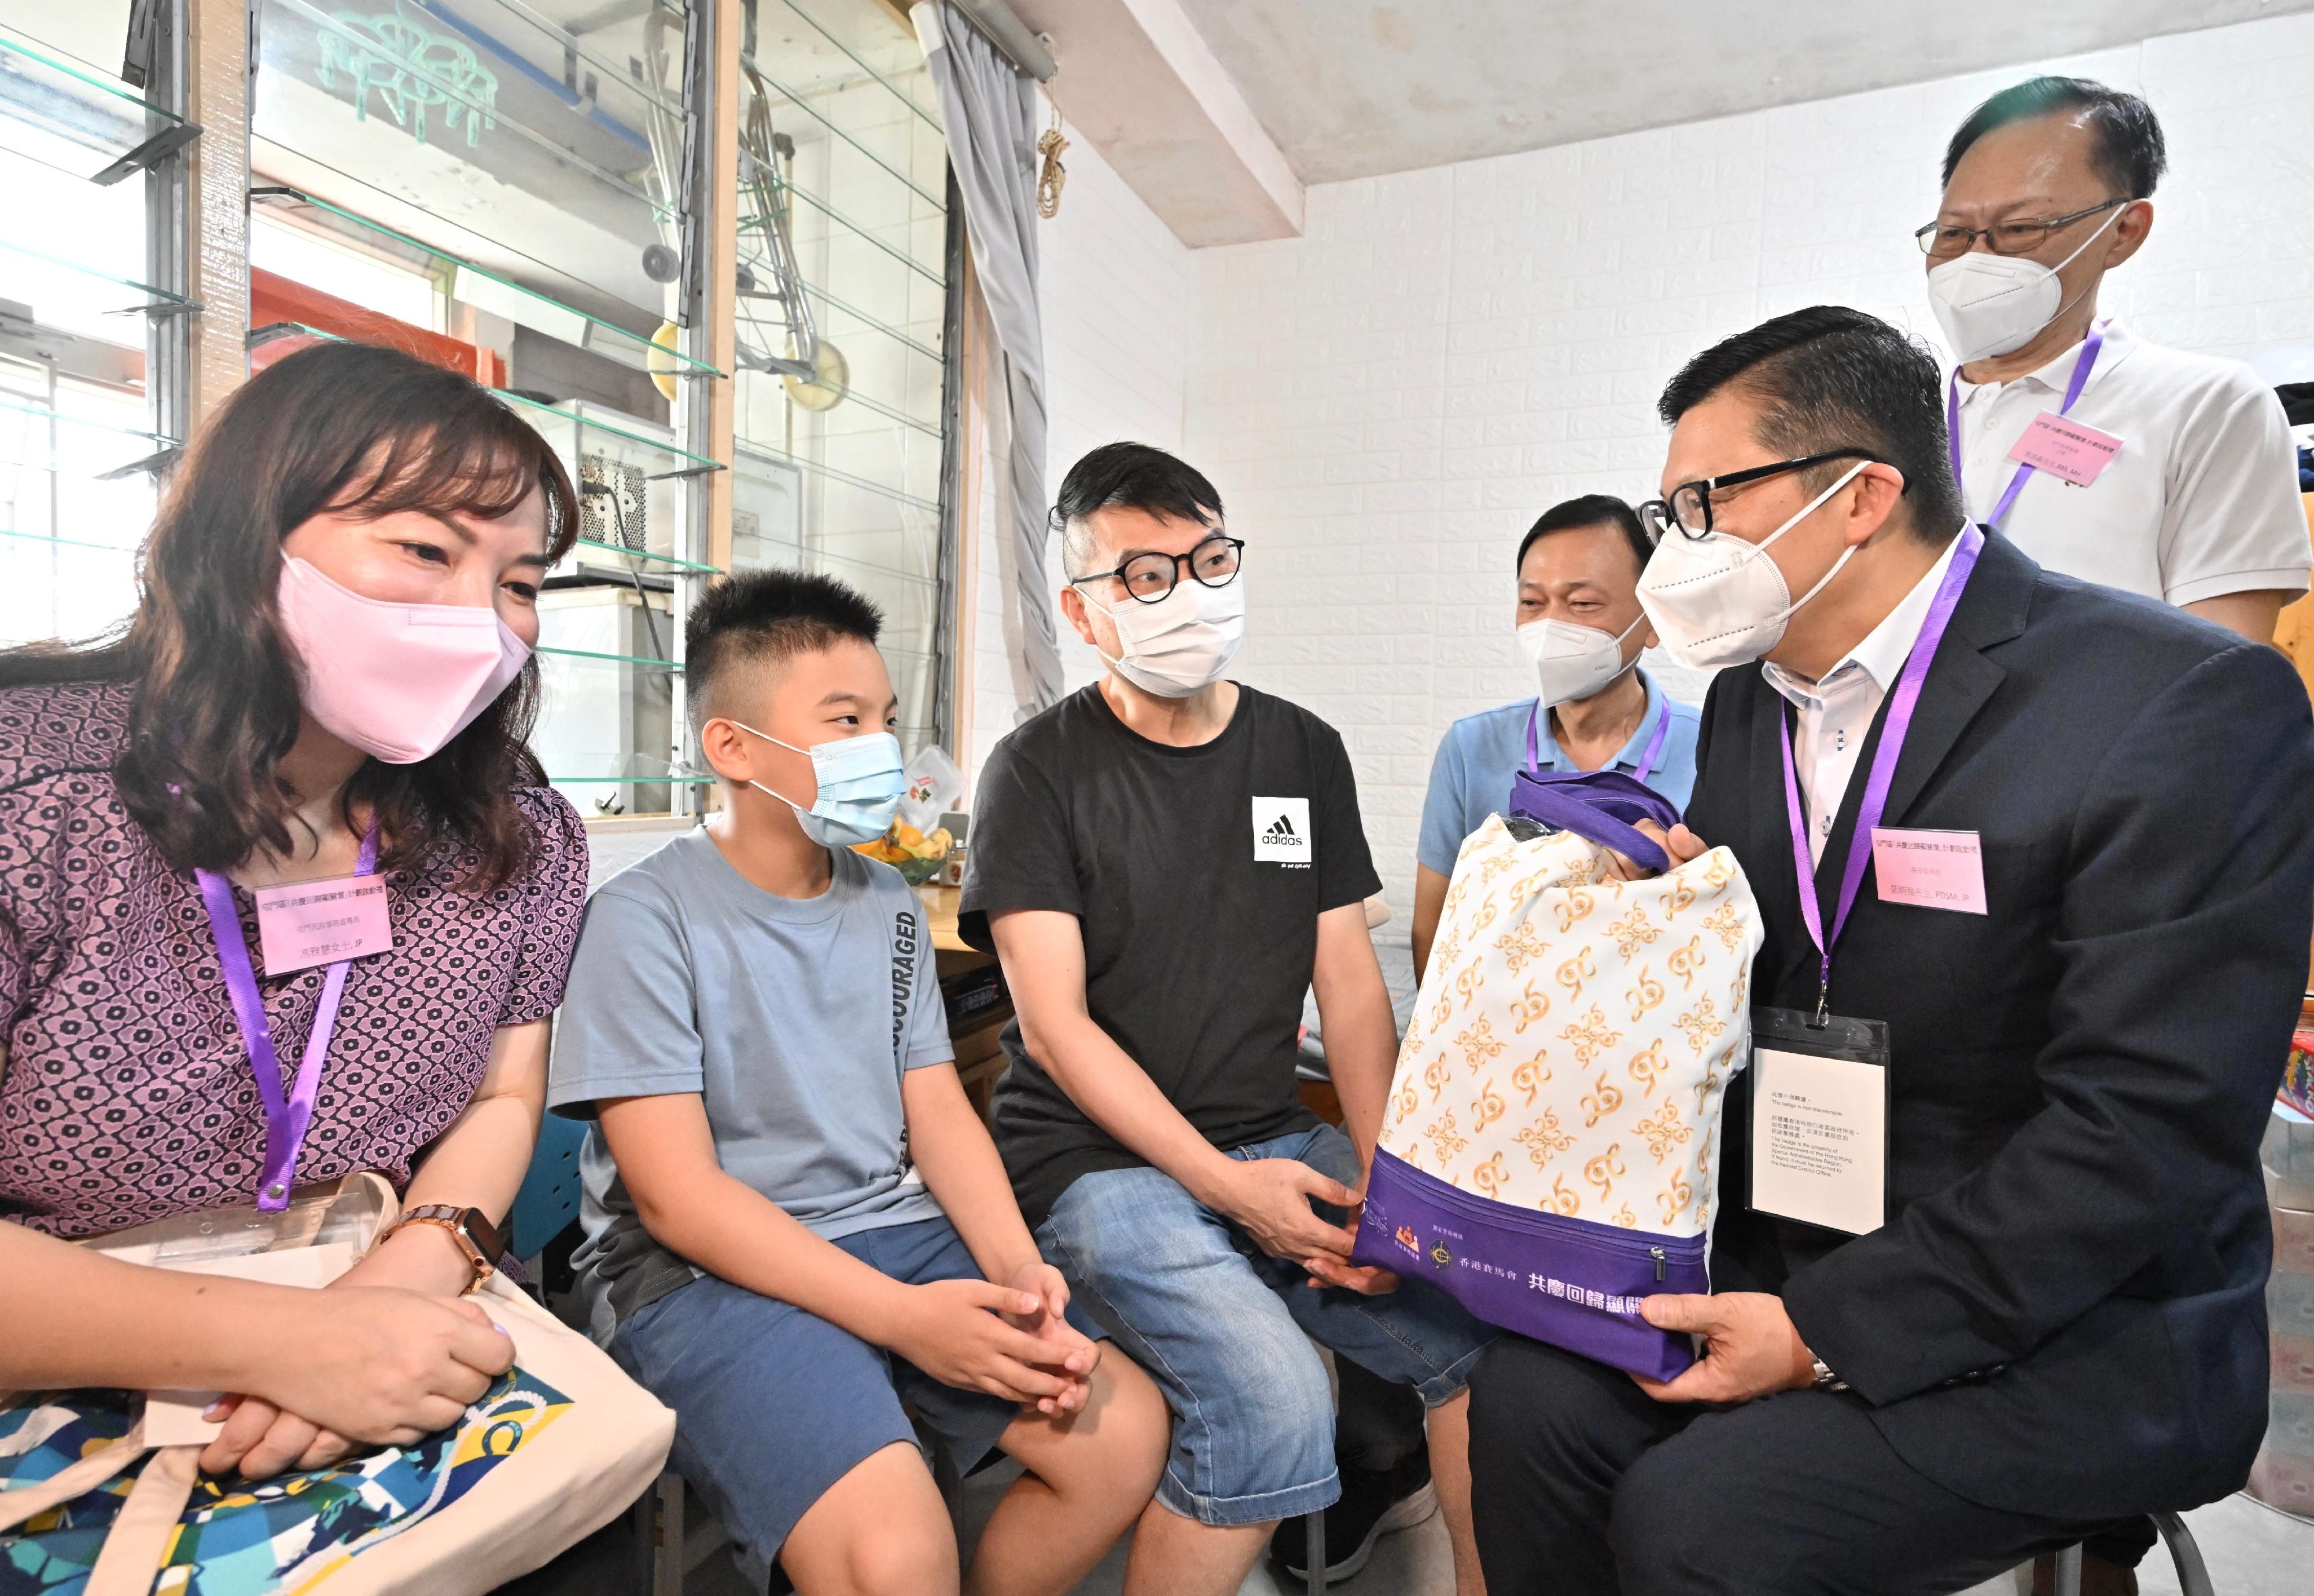 The Secretary for Security, Mr Tang Ping-keung, today (June 19) paid home visits under the Celebrations for All project in Tuen Mun District to show his care and concern for the grass-roots families, and distributed gift packs in celebration of the 25th anniversary of the establishment of the Hong Kong Special Administrative Region (HKSAR). Photo shows Mr Tang (first right) visiting a grass-roots family in Tai Hing Estate and sending them gift packs to convey blessings to the family on behalf of the HKSAR Government.